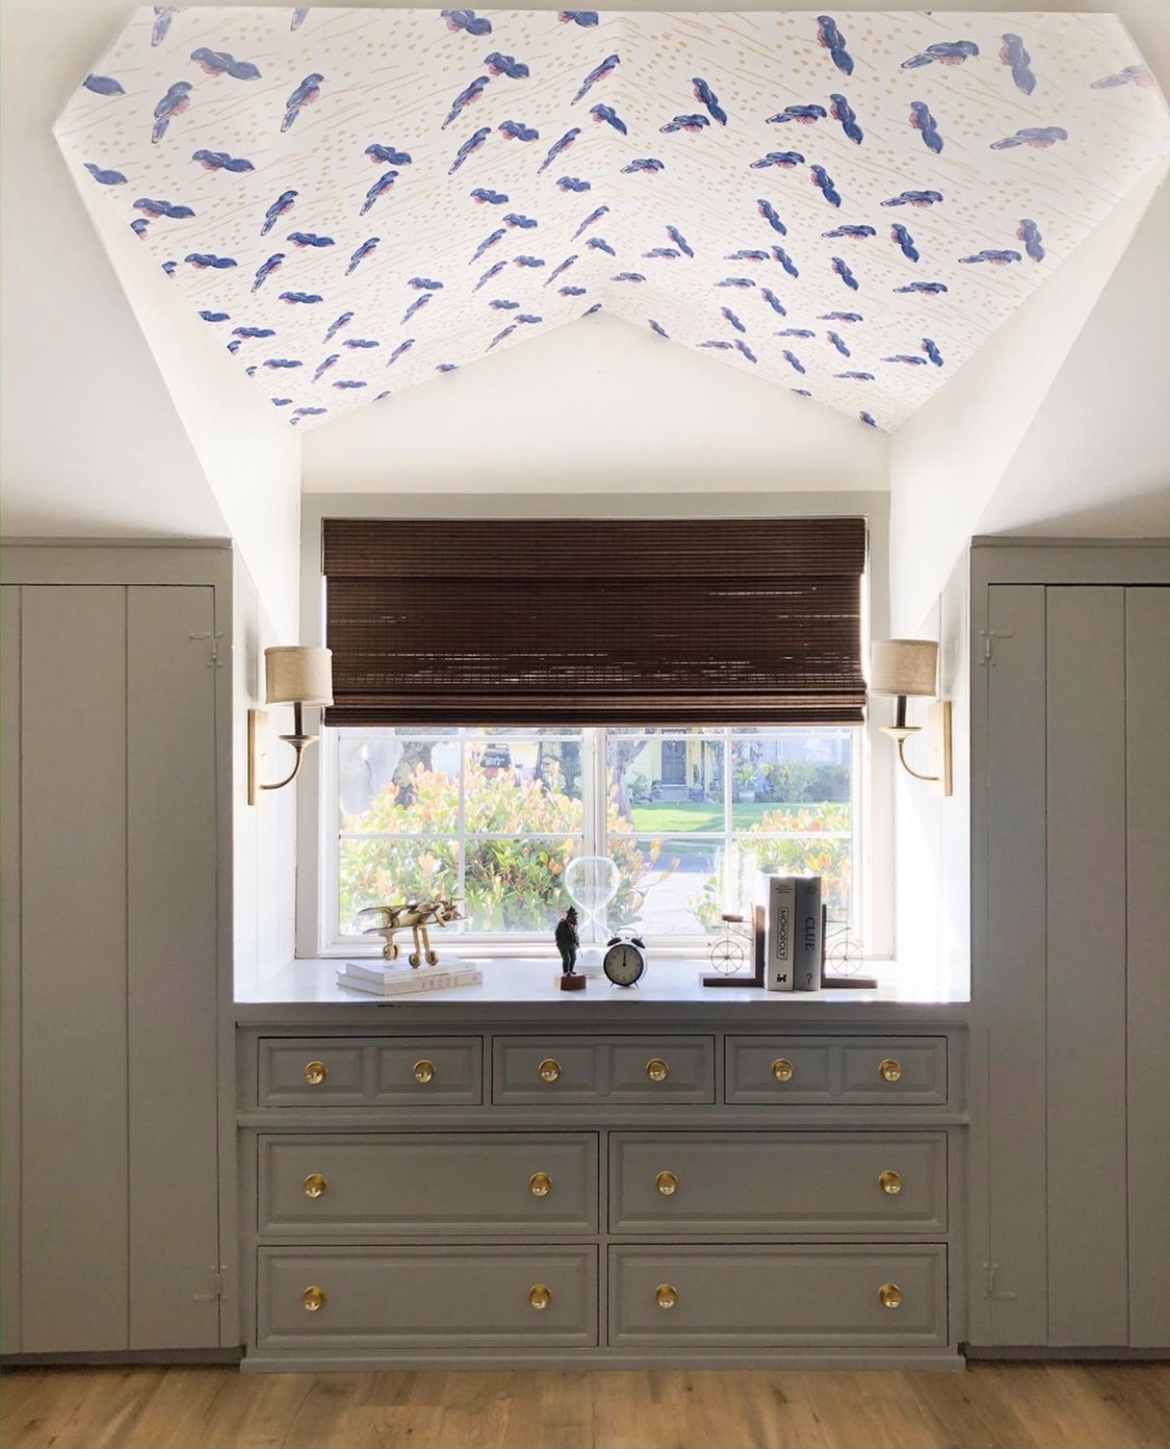 window and dresser in between closets, wallpapered ceiling, roman shades, wooden woven shades, built in dresser, gold sconces with shades, shiplap paneling, shiplap closets, rejuvenation hardware, kid's room inspiration, greige paint color, interior dormer window